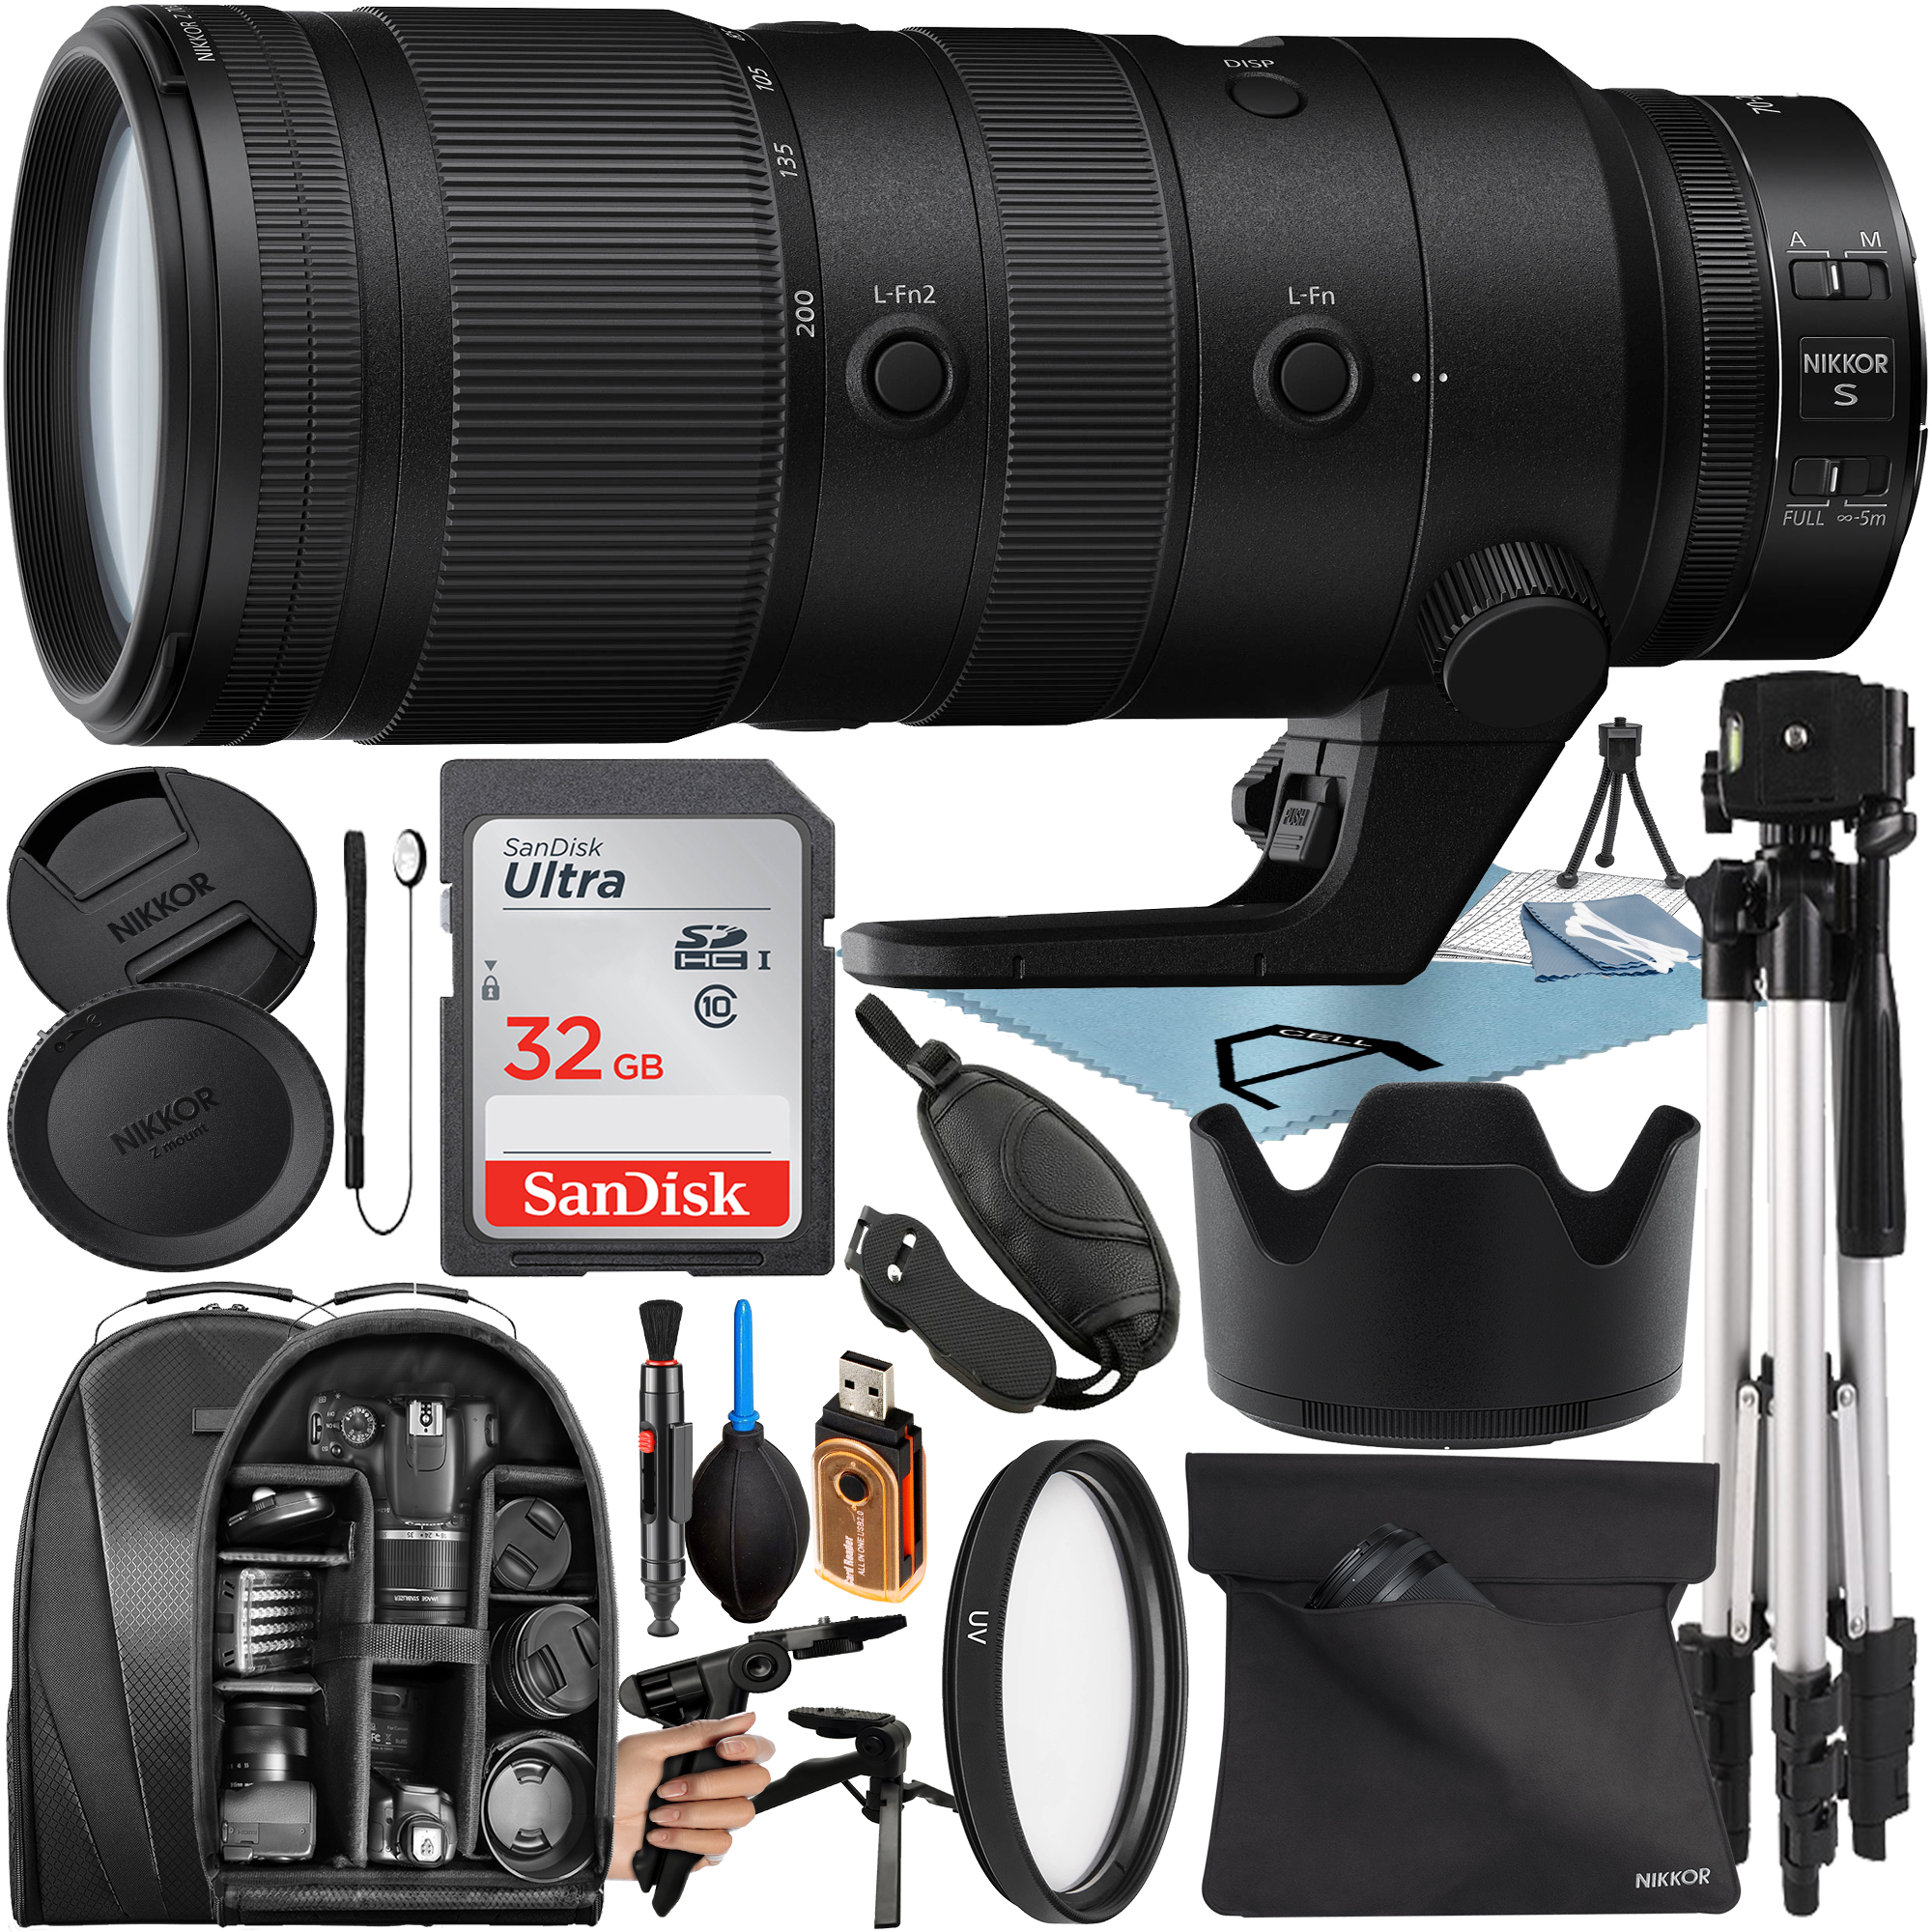 Nikon NIKKOR Z 70-200mm F/2.8 VR S Lens with 32GB SanDisk Memory Card + Tripod + Backpack + A-Cell Accessory Bundle